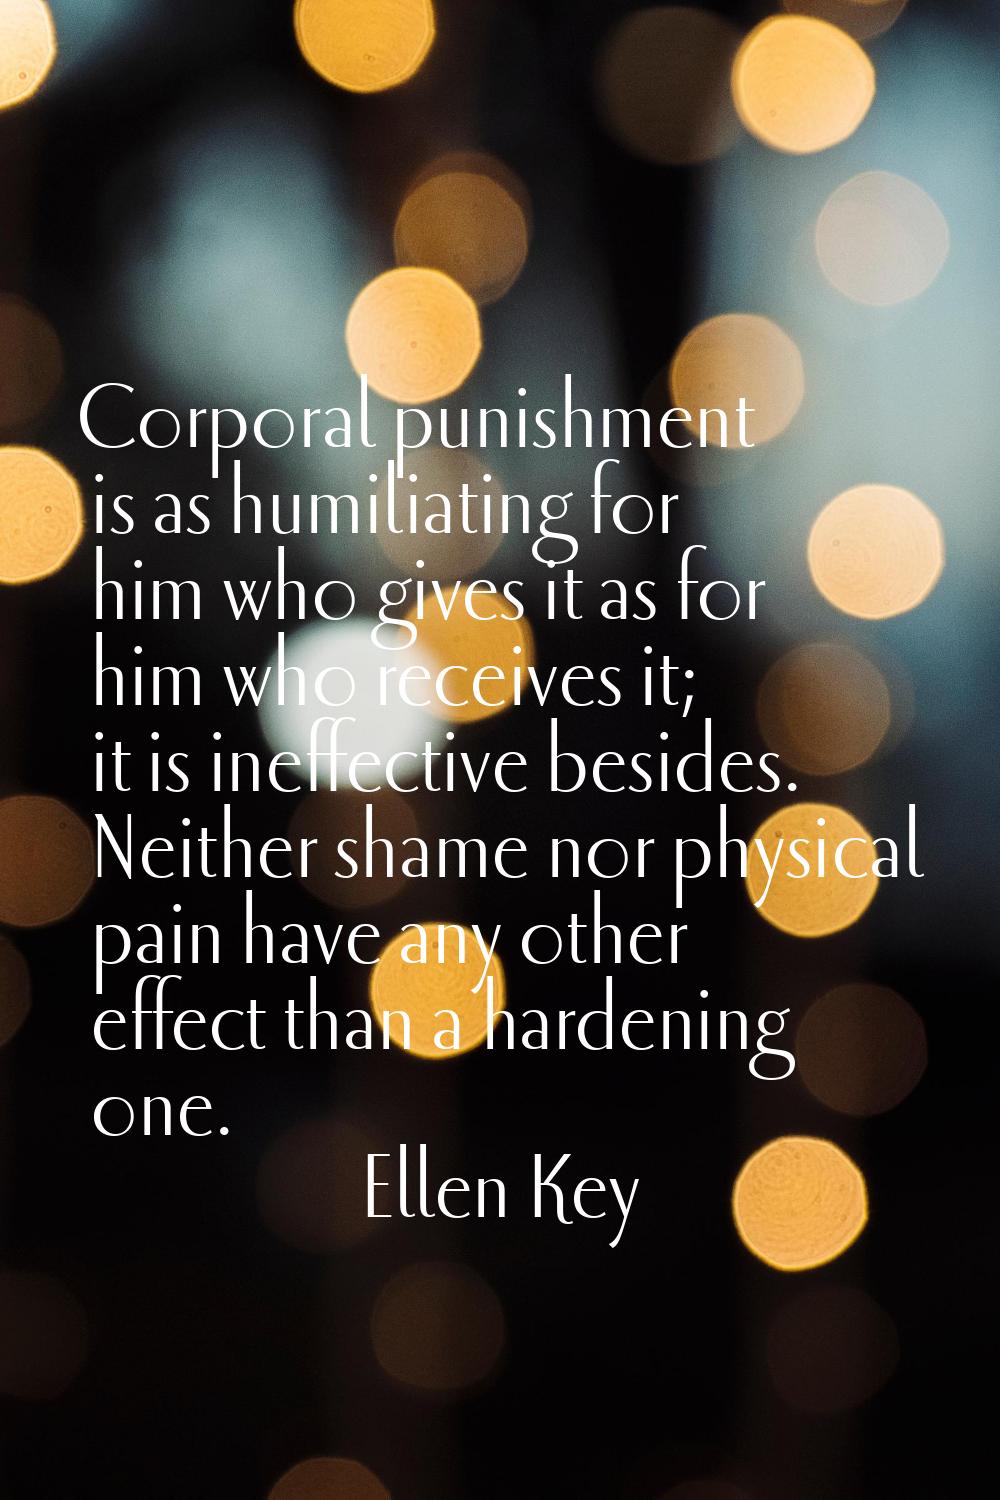 Corporal punishment is as humiliating for him who gives it as for him who receives it; it is ineffe